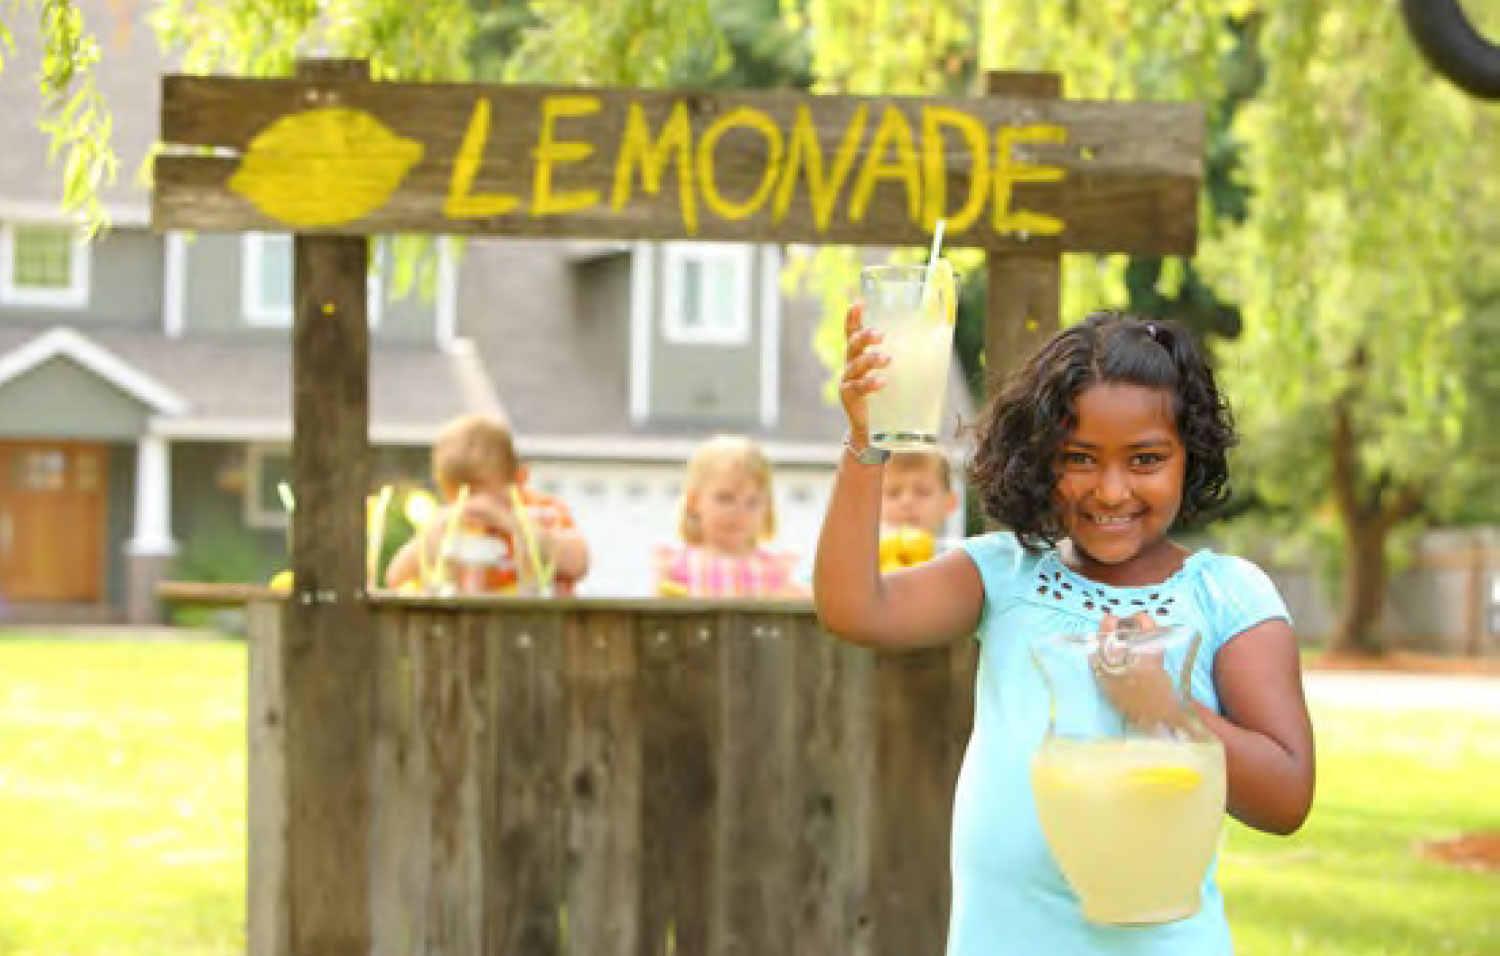 A girl holding a pitcher of lemonade in front of a lemonade stand.